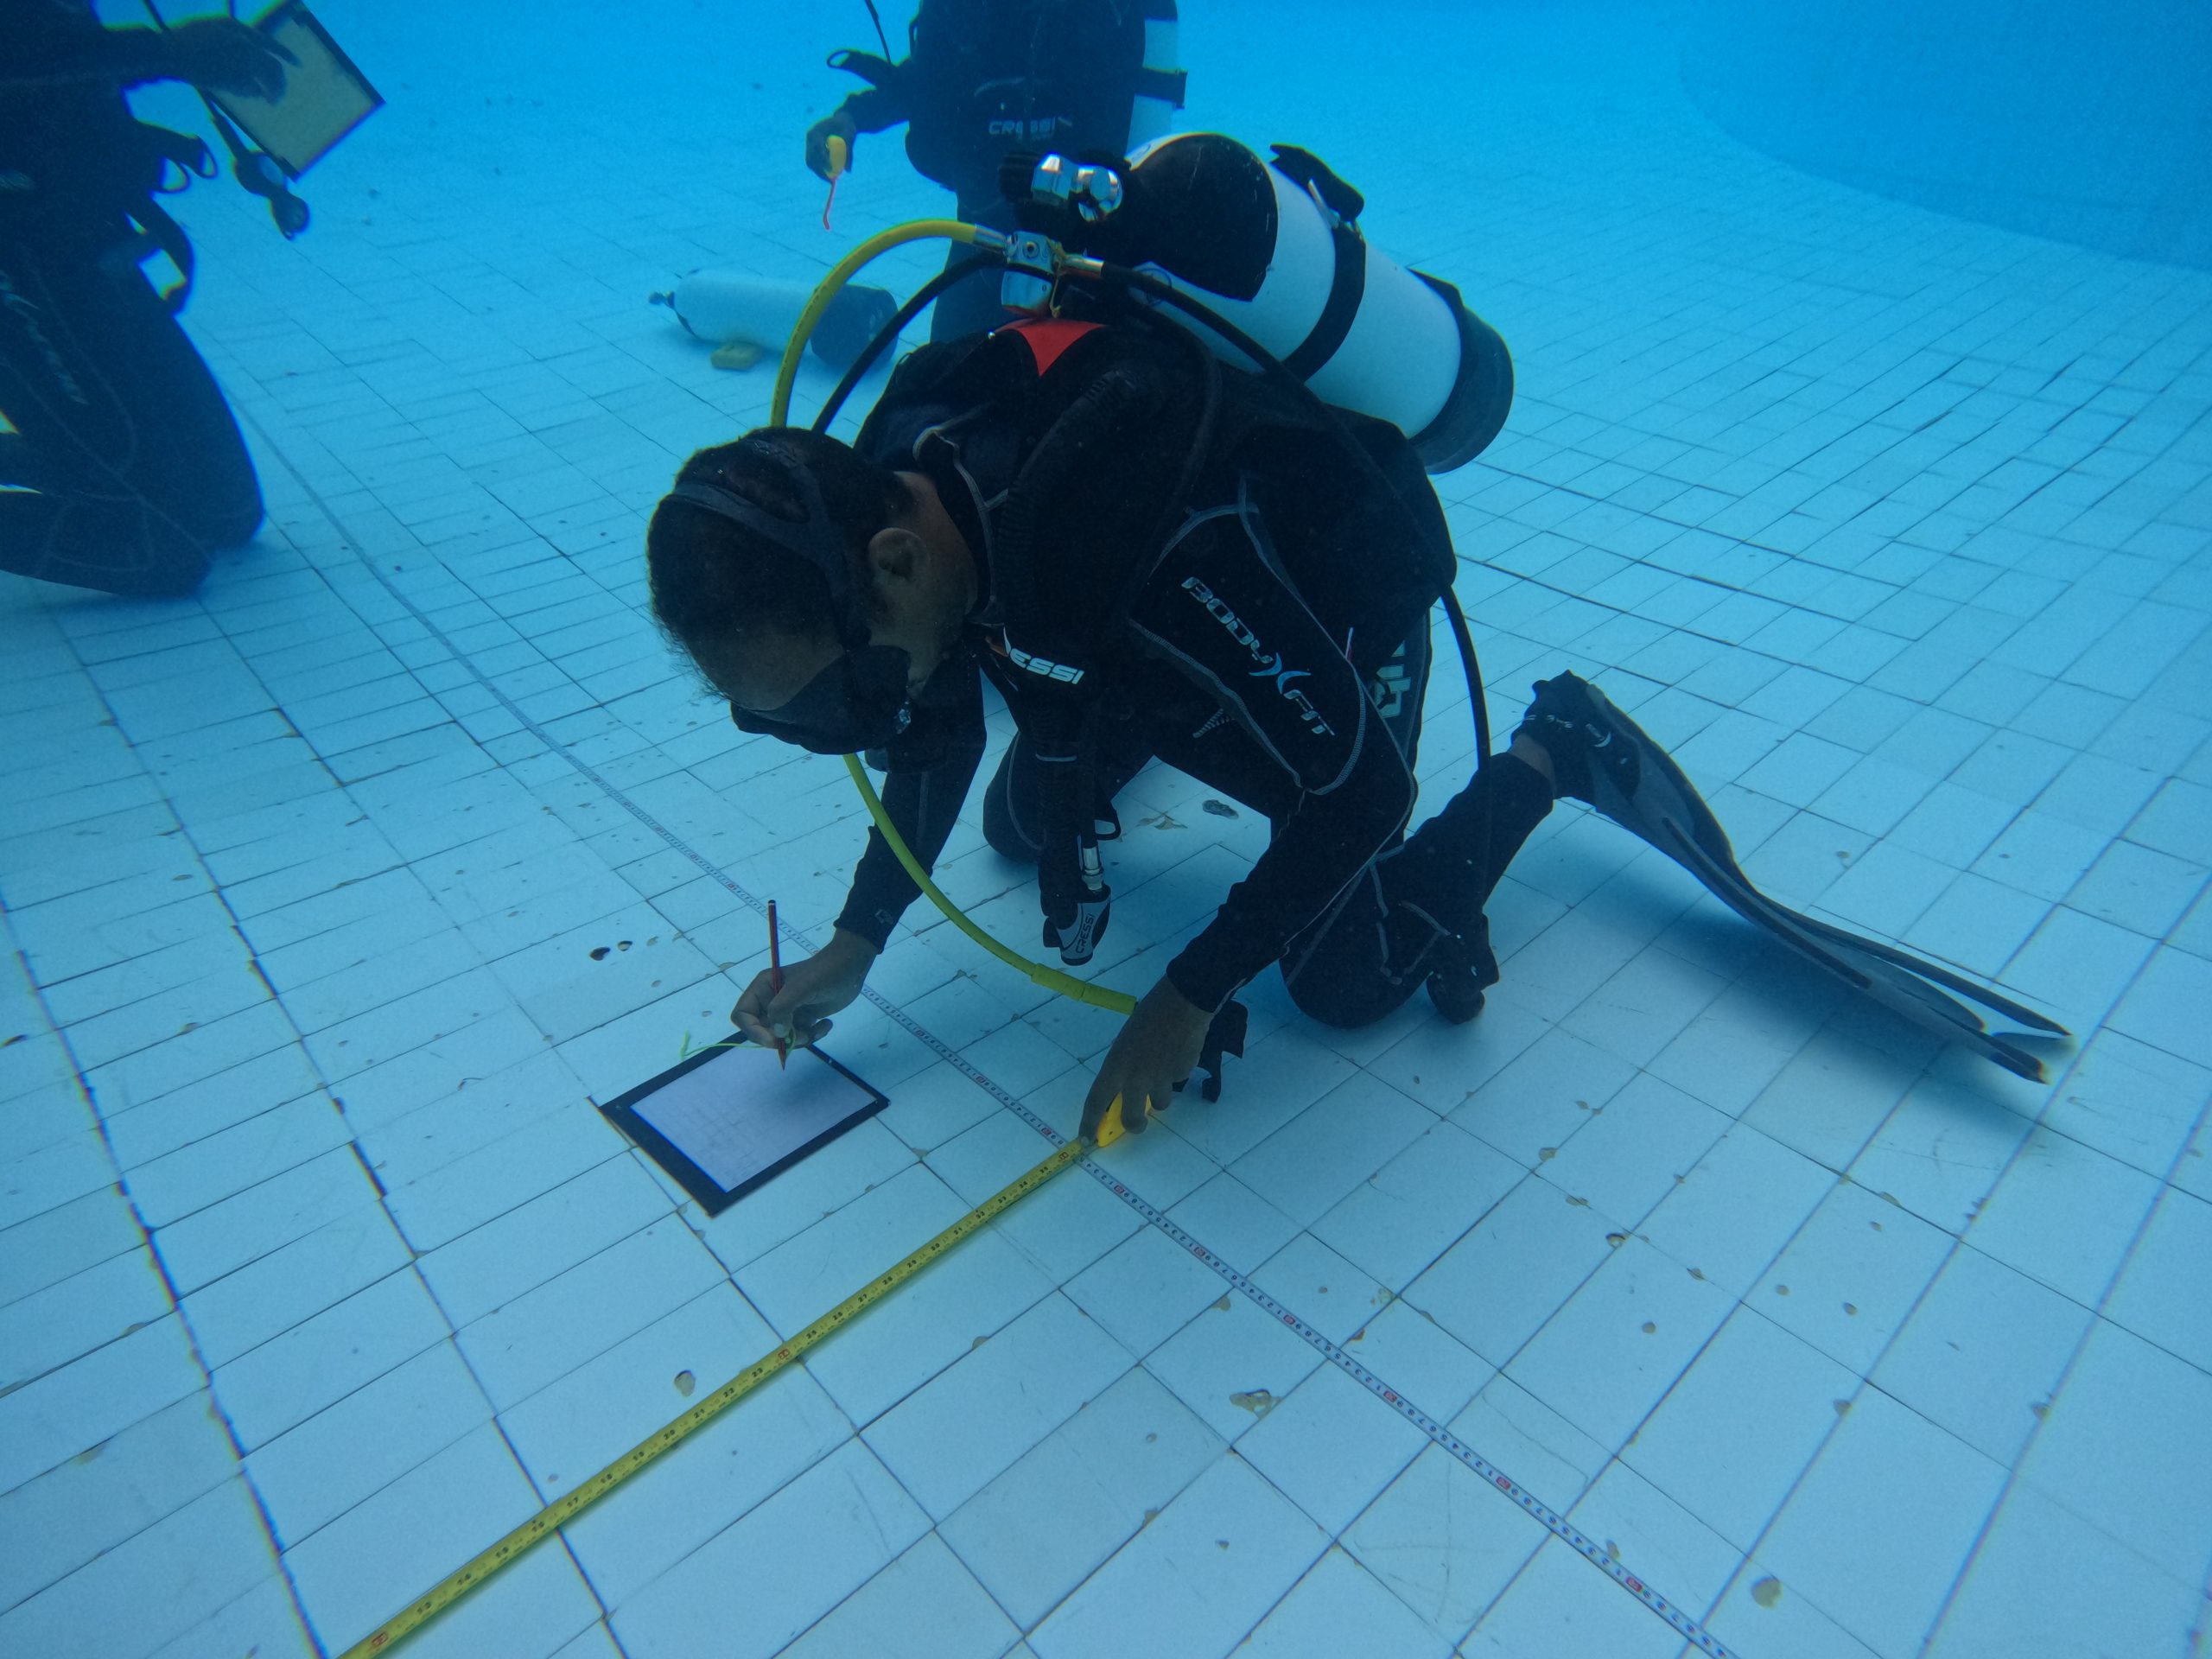 Participant practicing offsets and trilateration techniques in the pool 